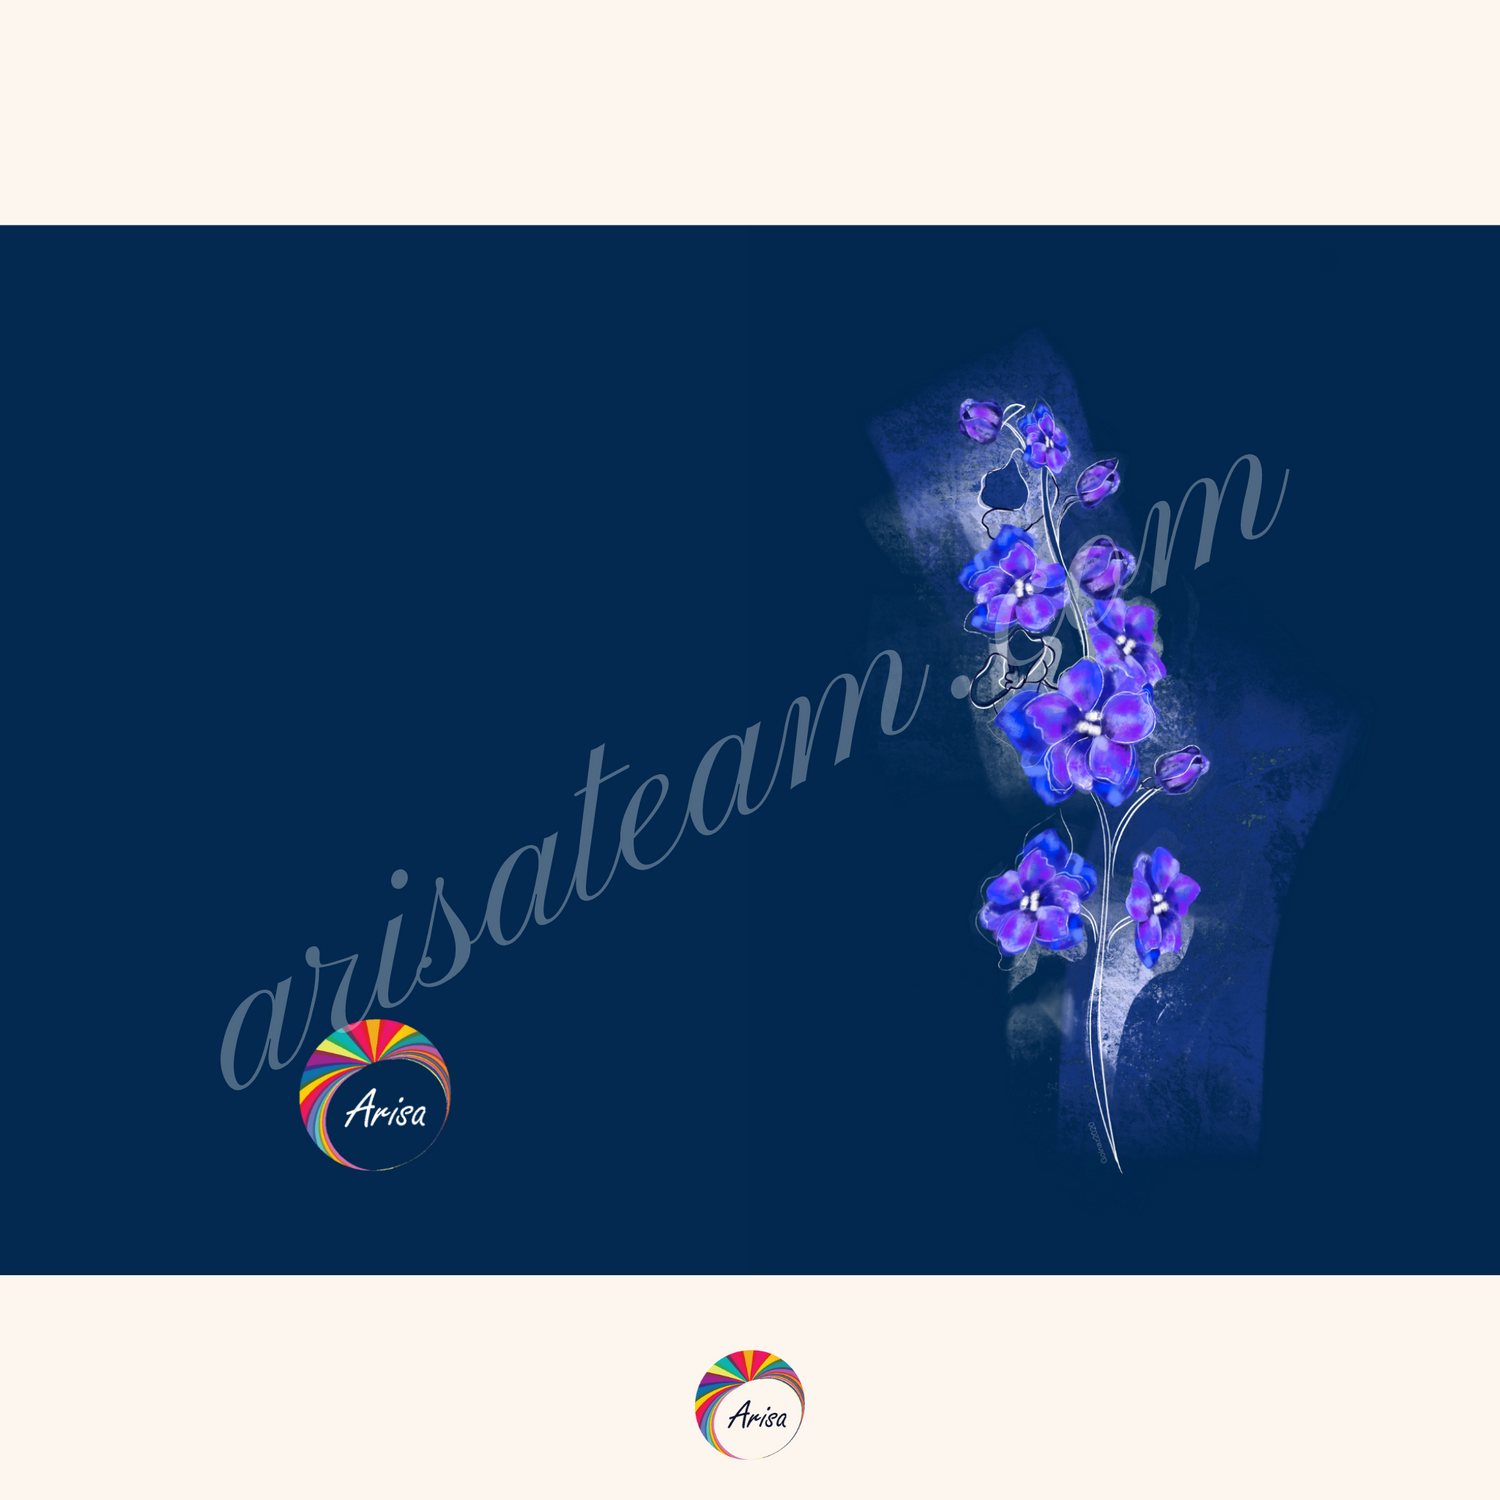 Larkspur Greeting Card by ArisaTeam in complete form before folding.